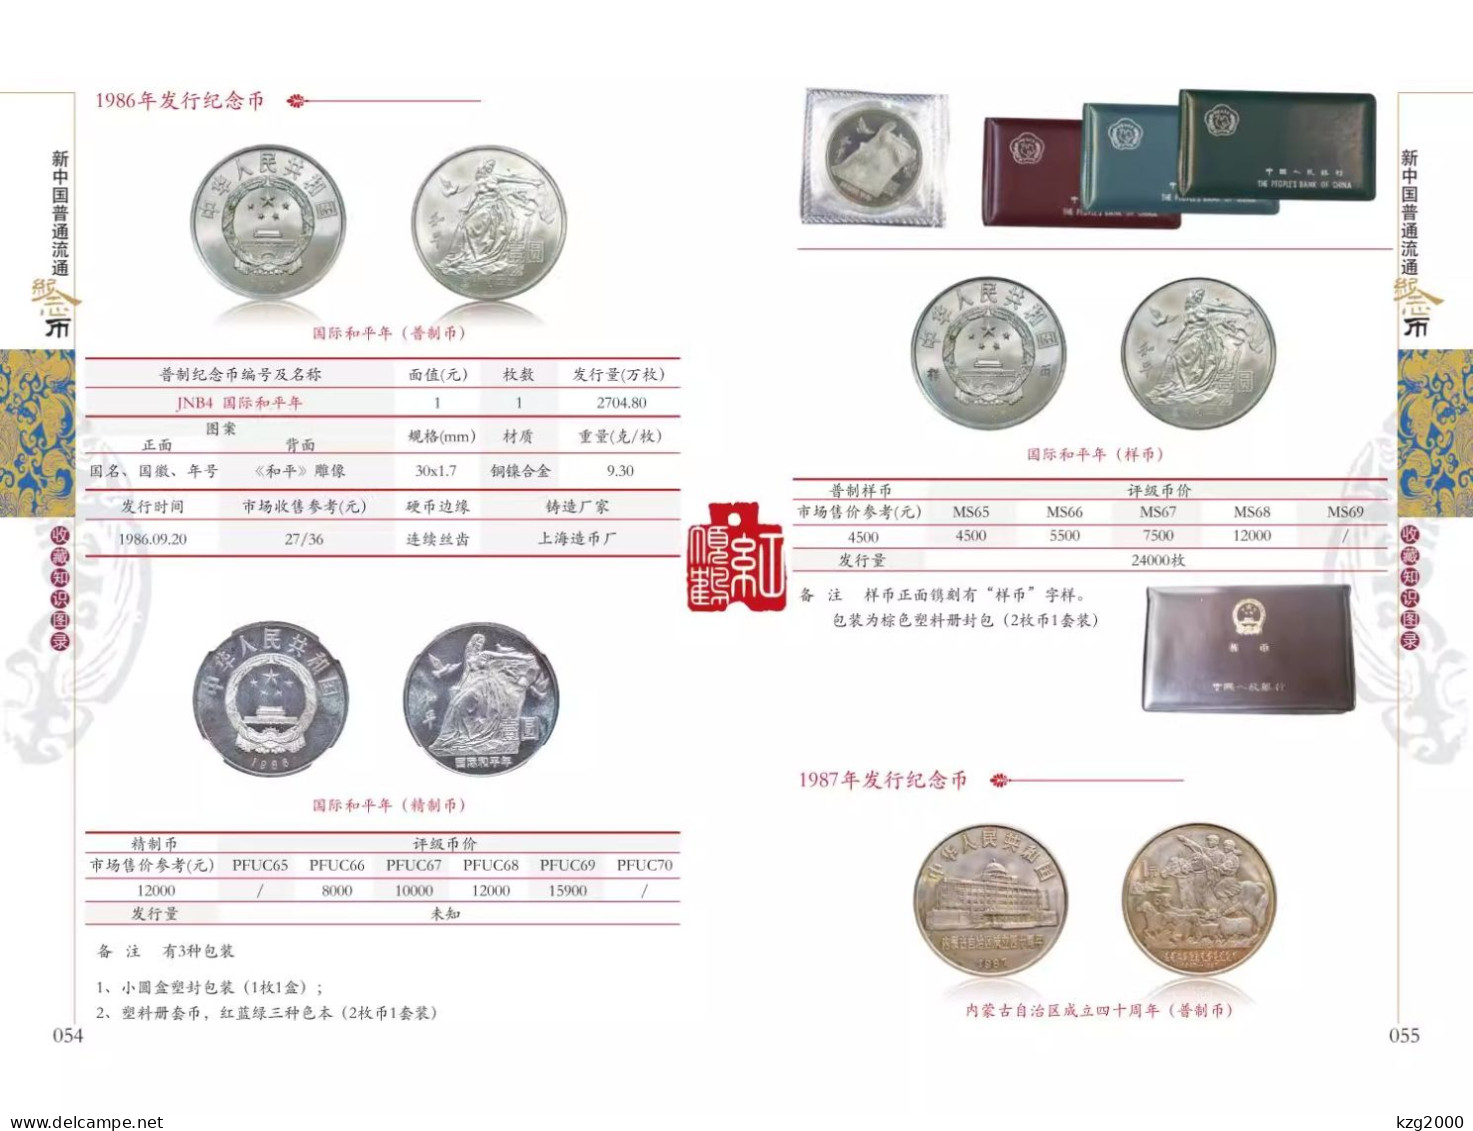 China 1984-2022 Catalogue of Commemorative Coins in Circulation